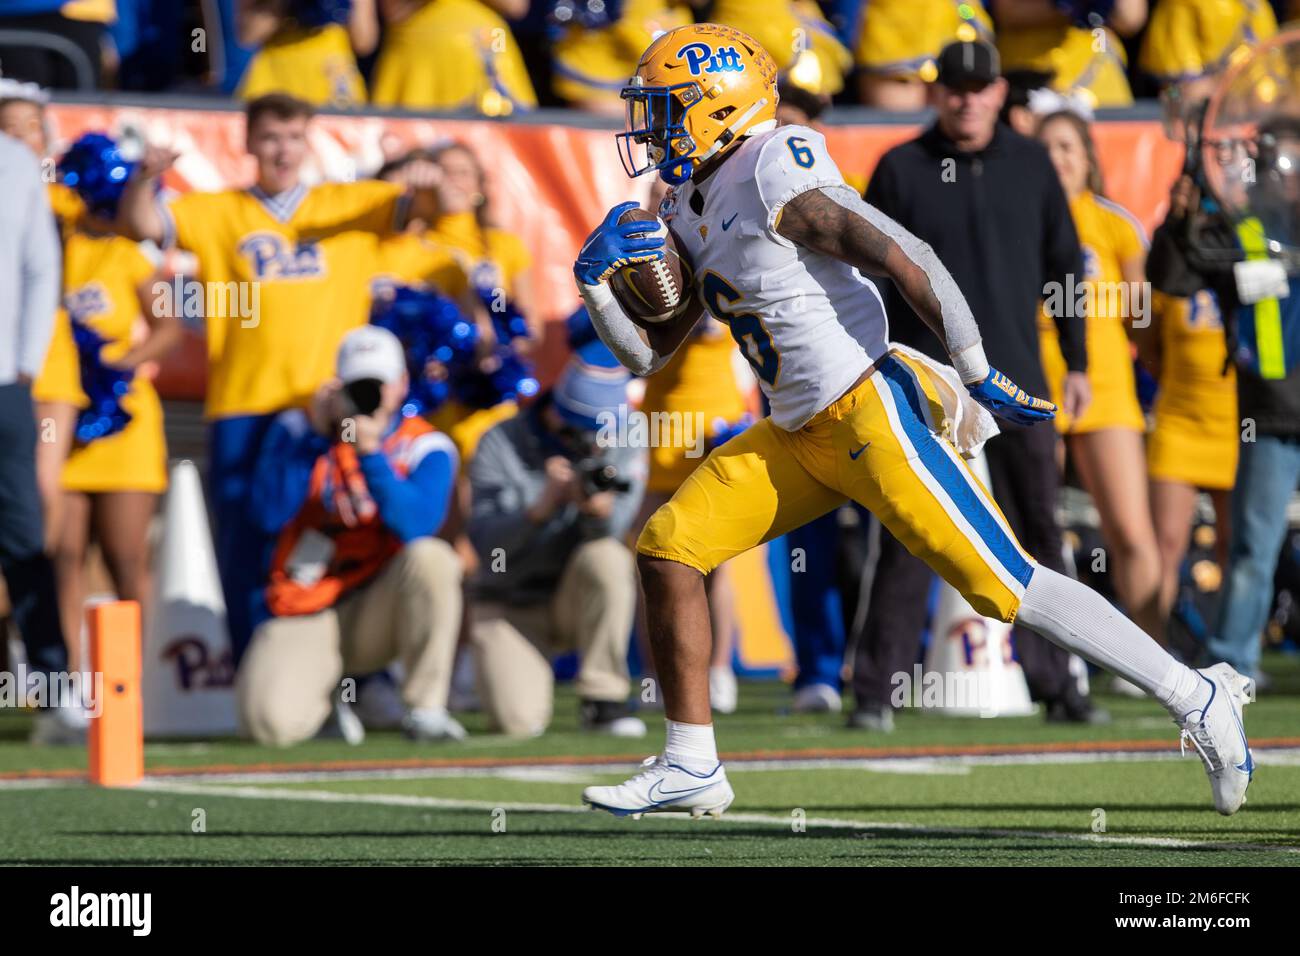 Pittsburgh Panthers running back Rodney Hammond Jr (6) segna un veloce touchdown durante il 2022 Tony The Tiger Sun Bowl tra i Bruins UCLA vs t. Foto Stock